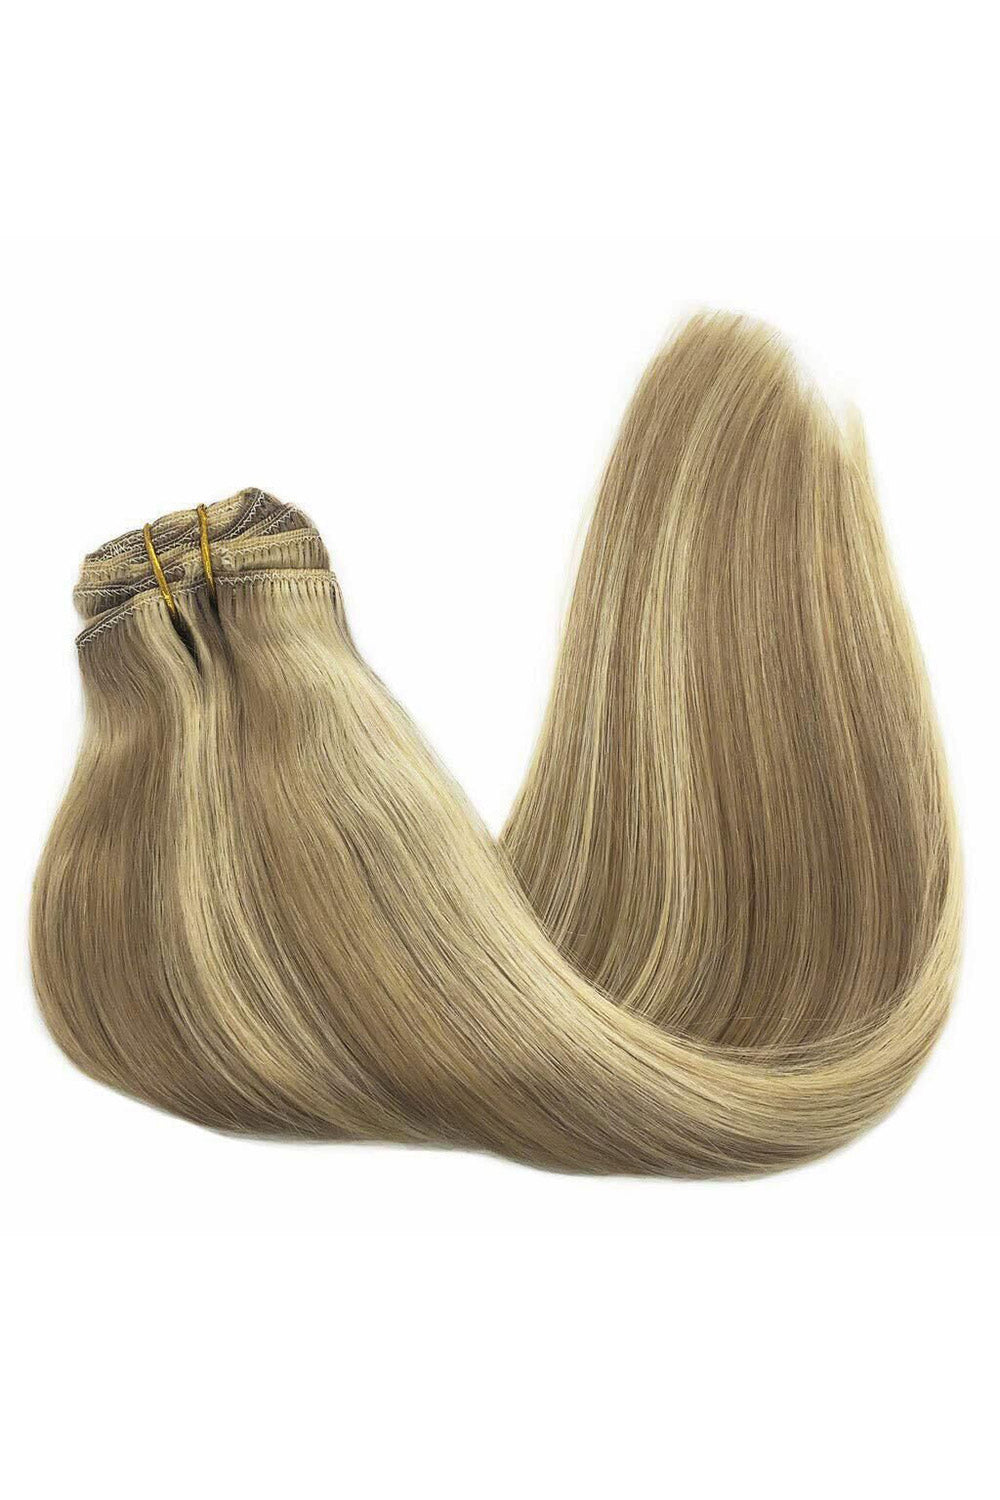 ygwigs clip hair extension 16/22 color for black women